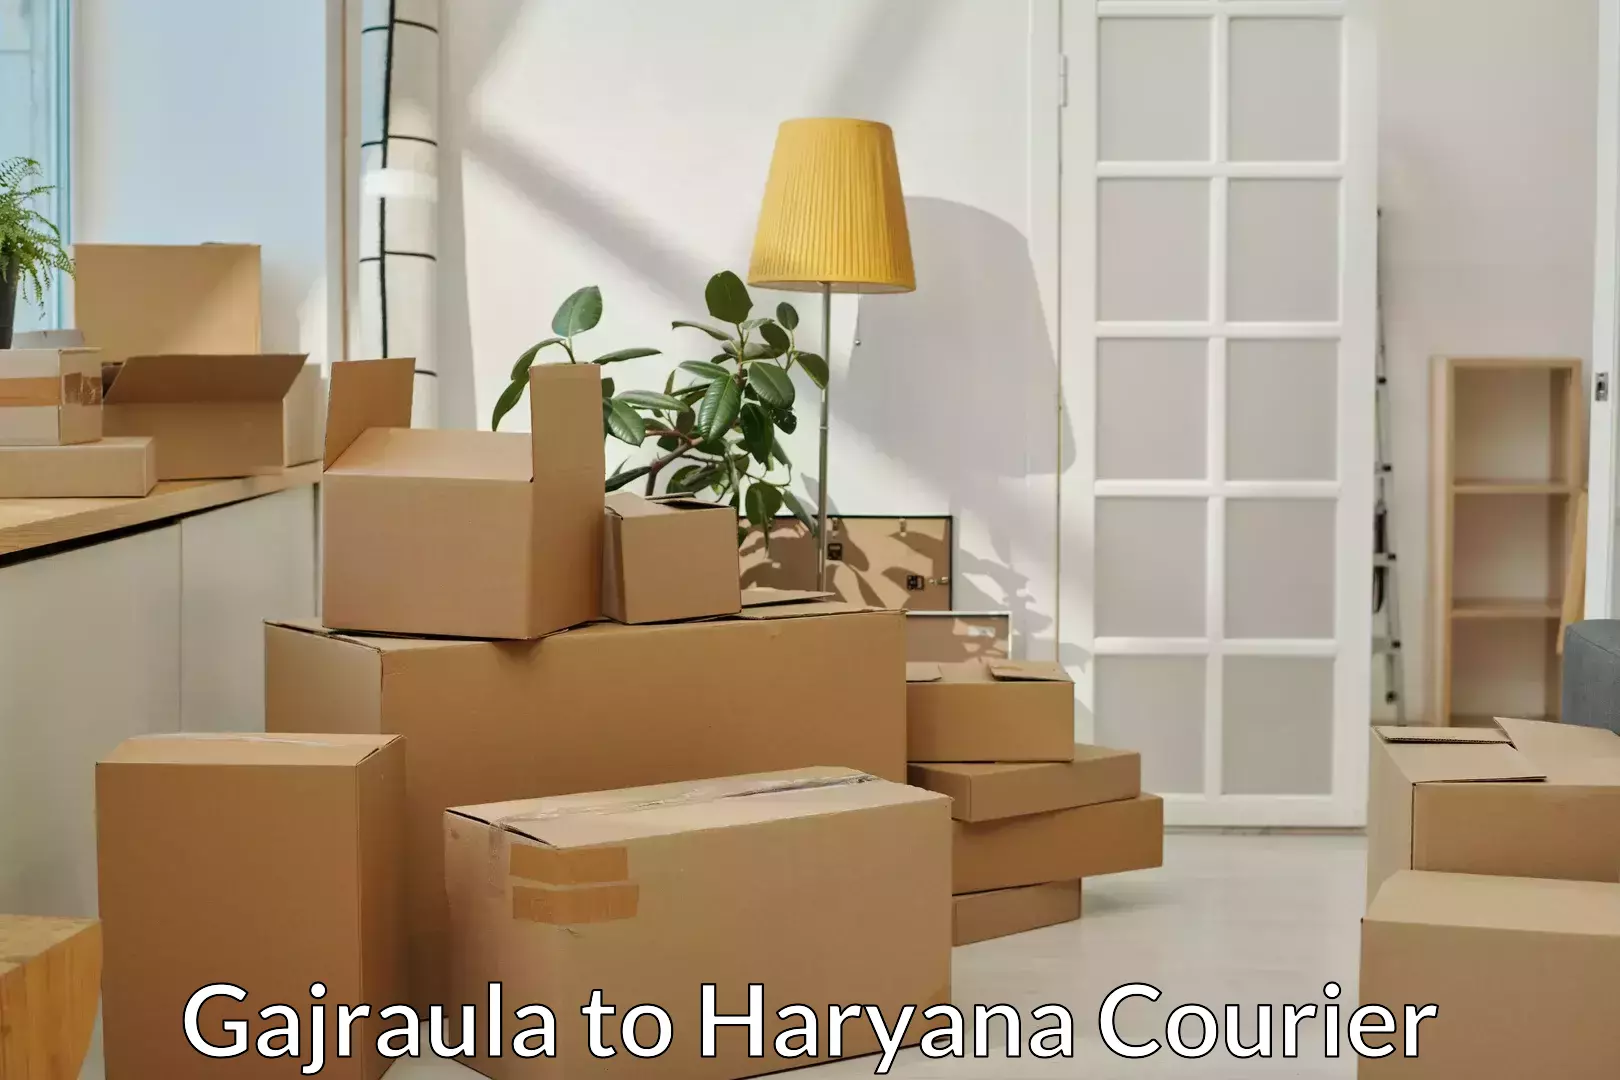 Professional movers in Gajraula to Gurgaon